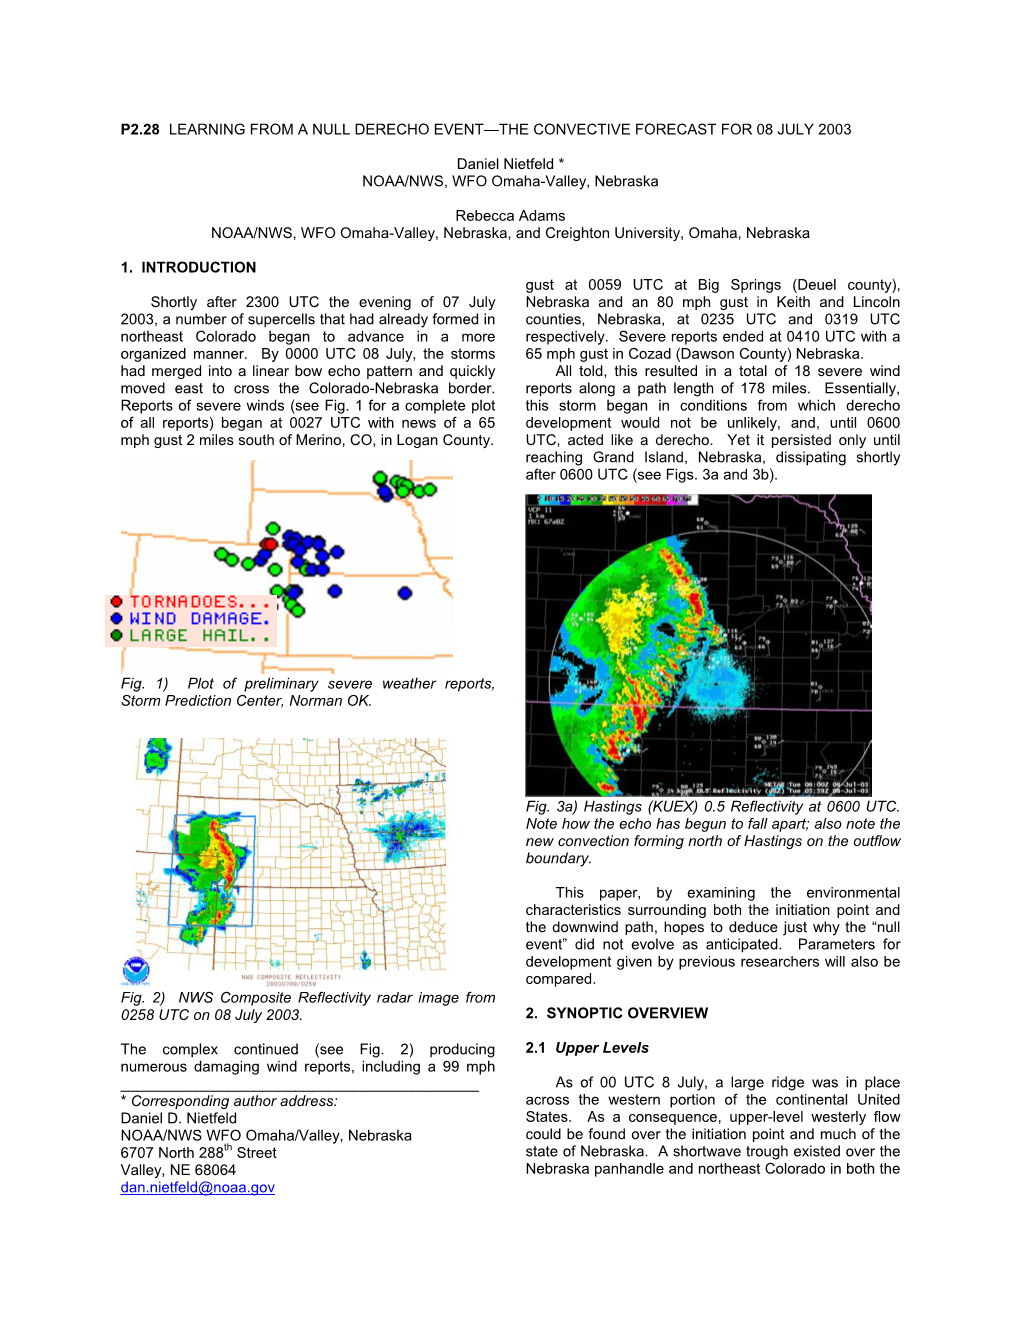 P2.28 Learning from a Null Derecho Event—The Convective Forecast for 08 July 2003